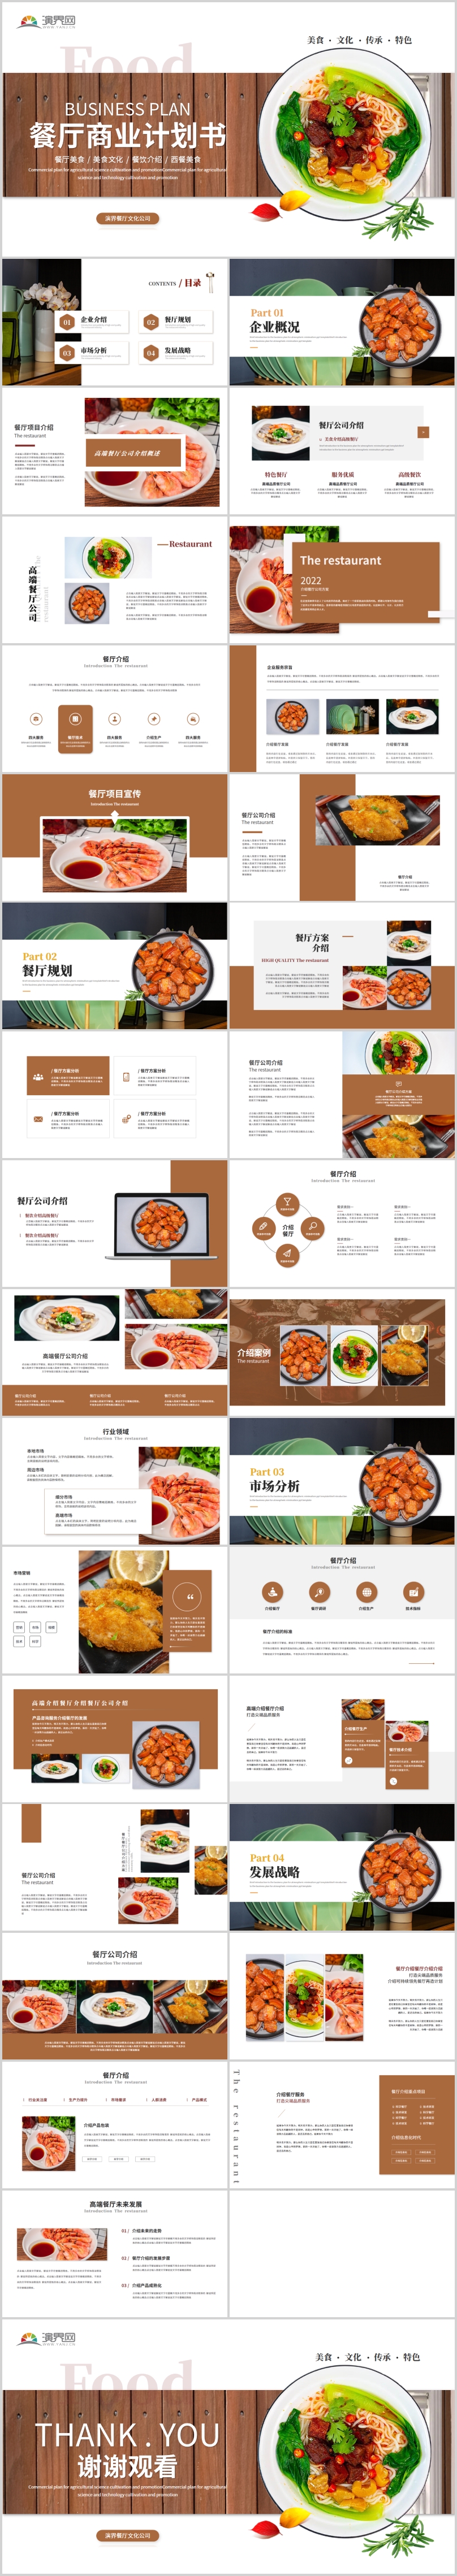  High end grand restaurant business plan Catering introduction Food introduction PPT template